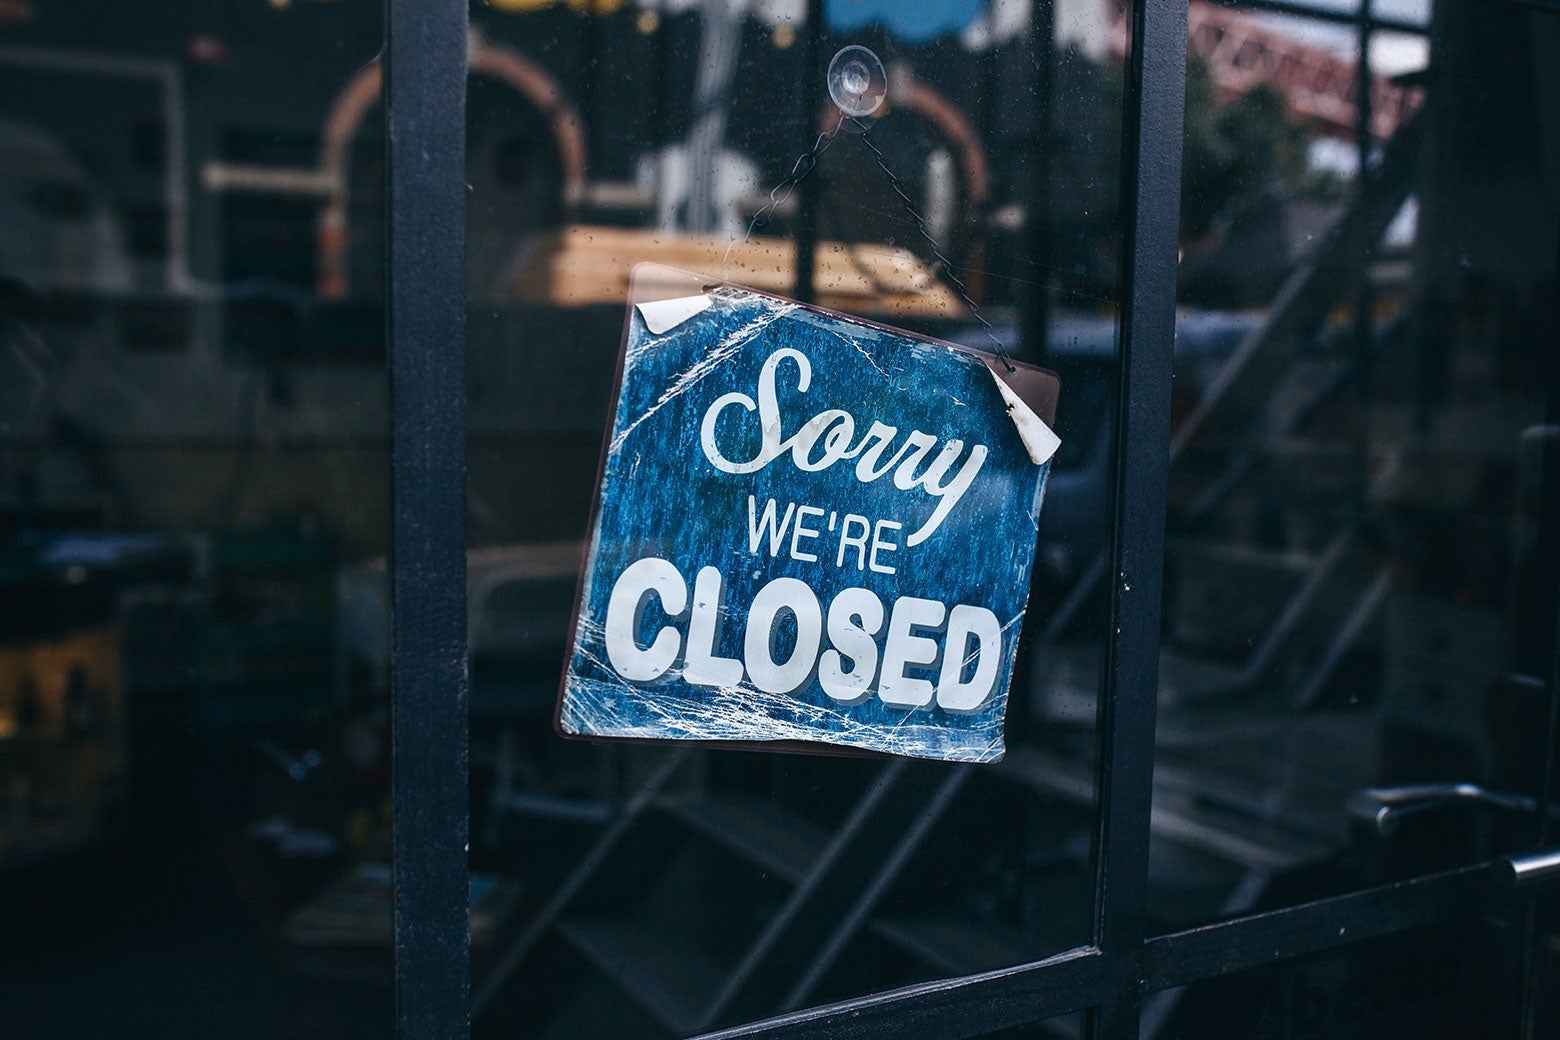 A "sorry we're closed" sign.